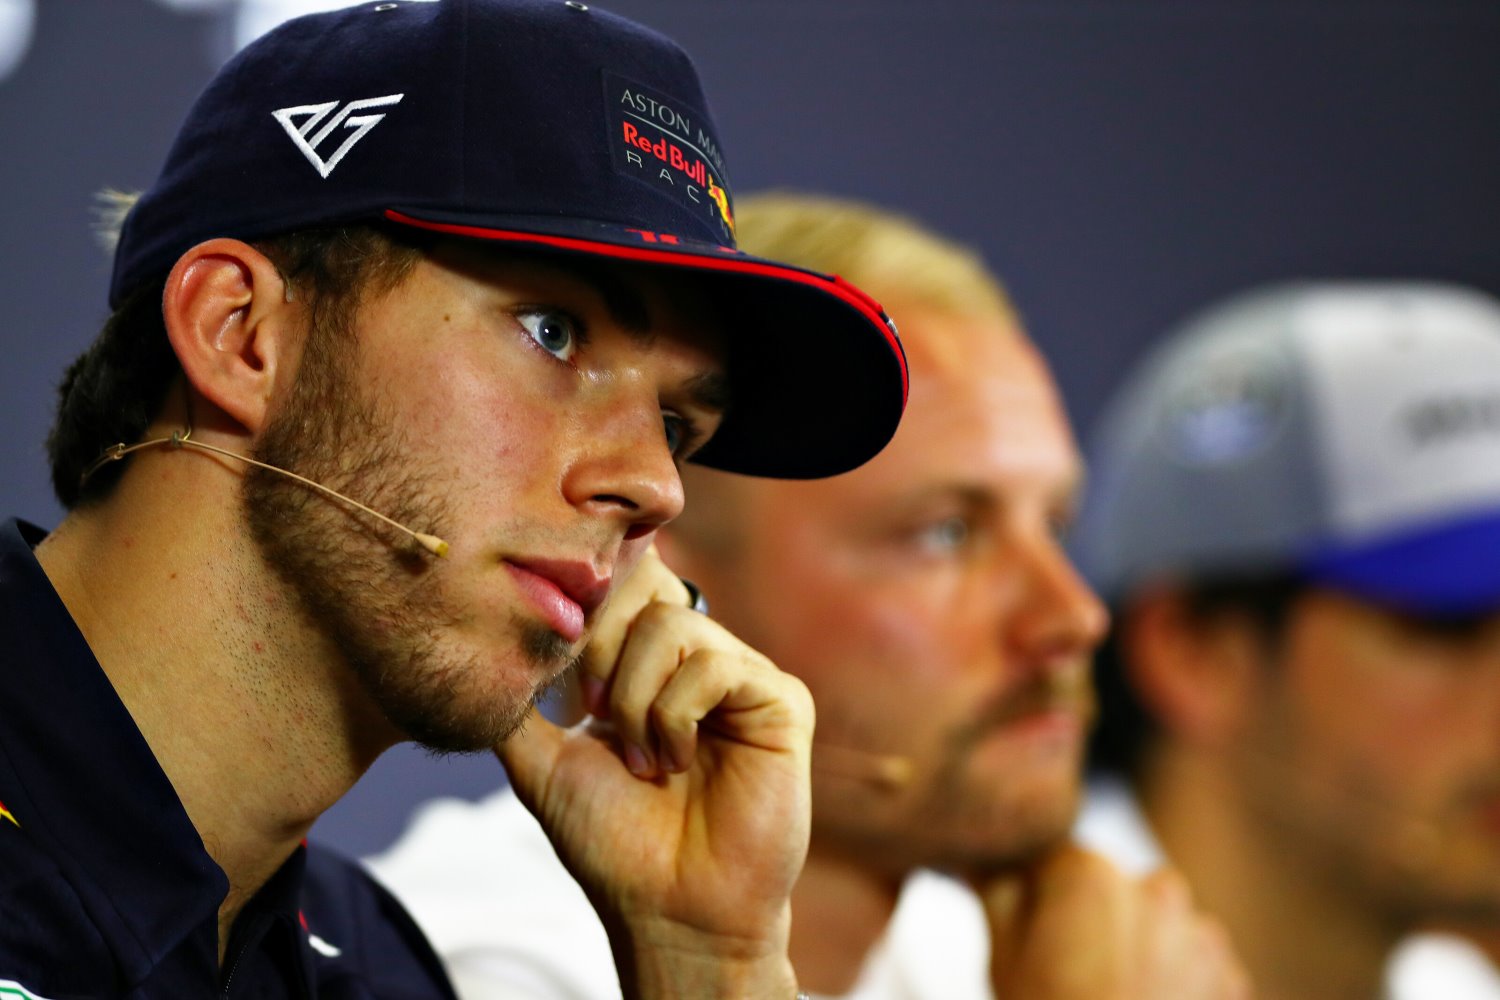 Gasly lapped by his teammate in Austria